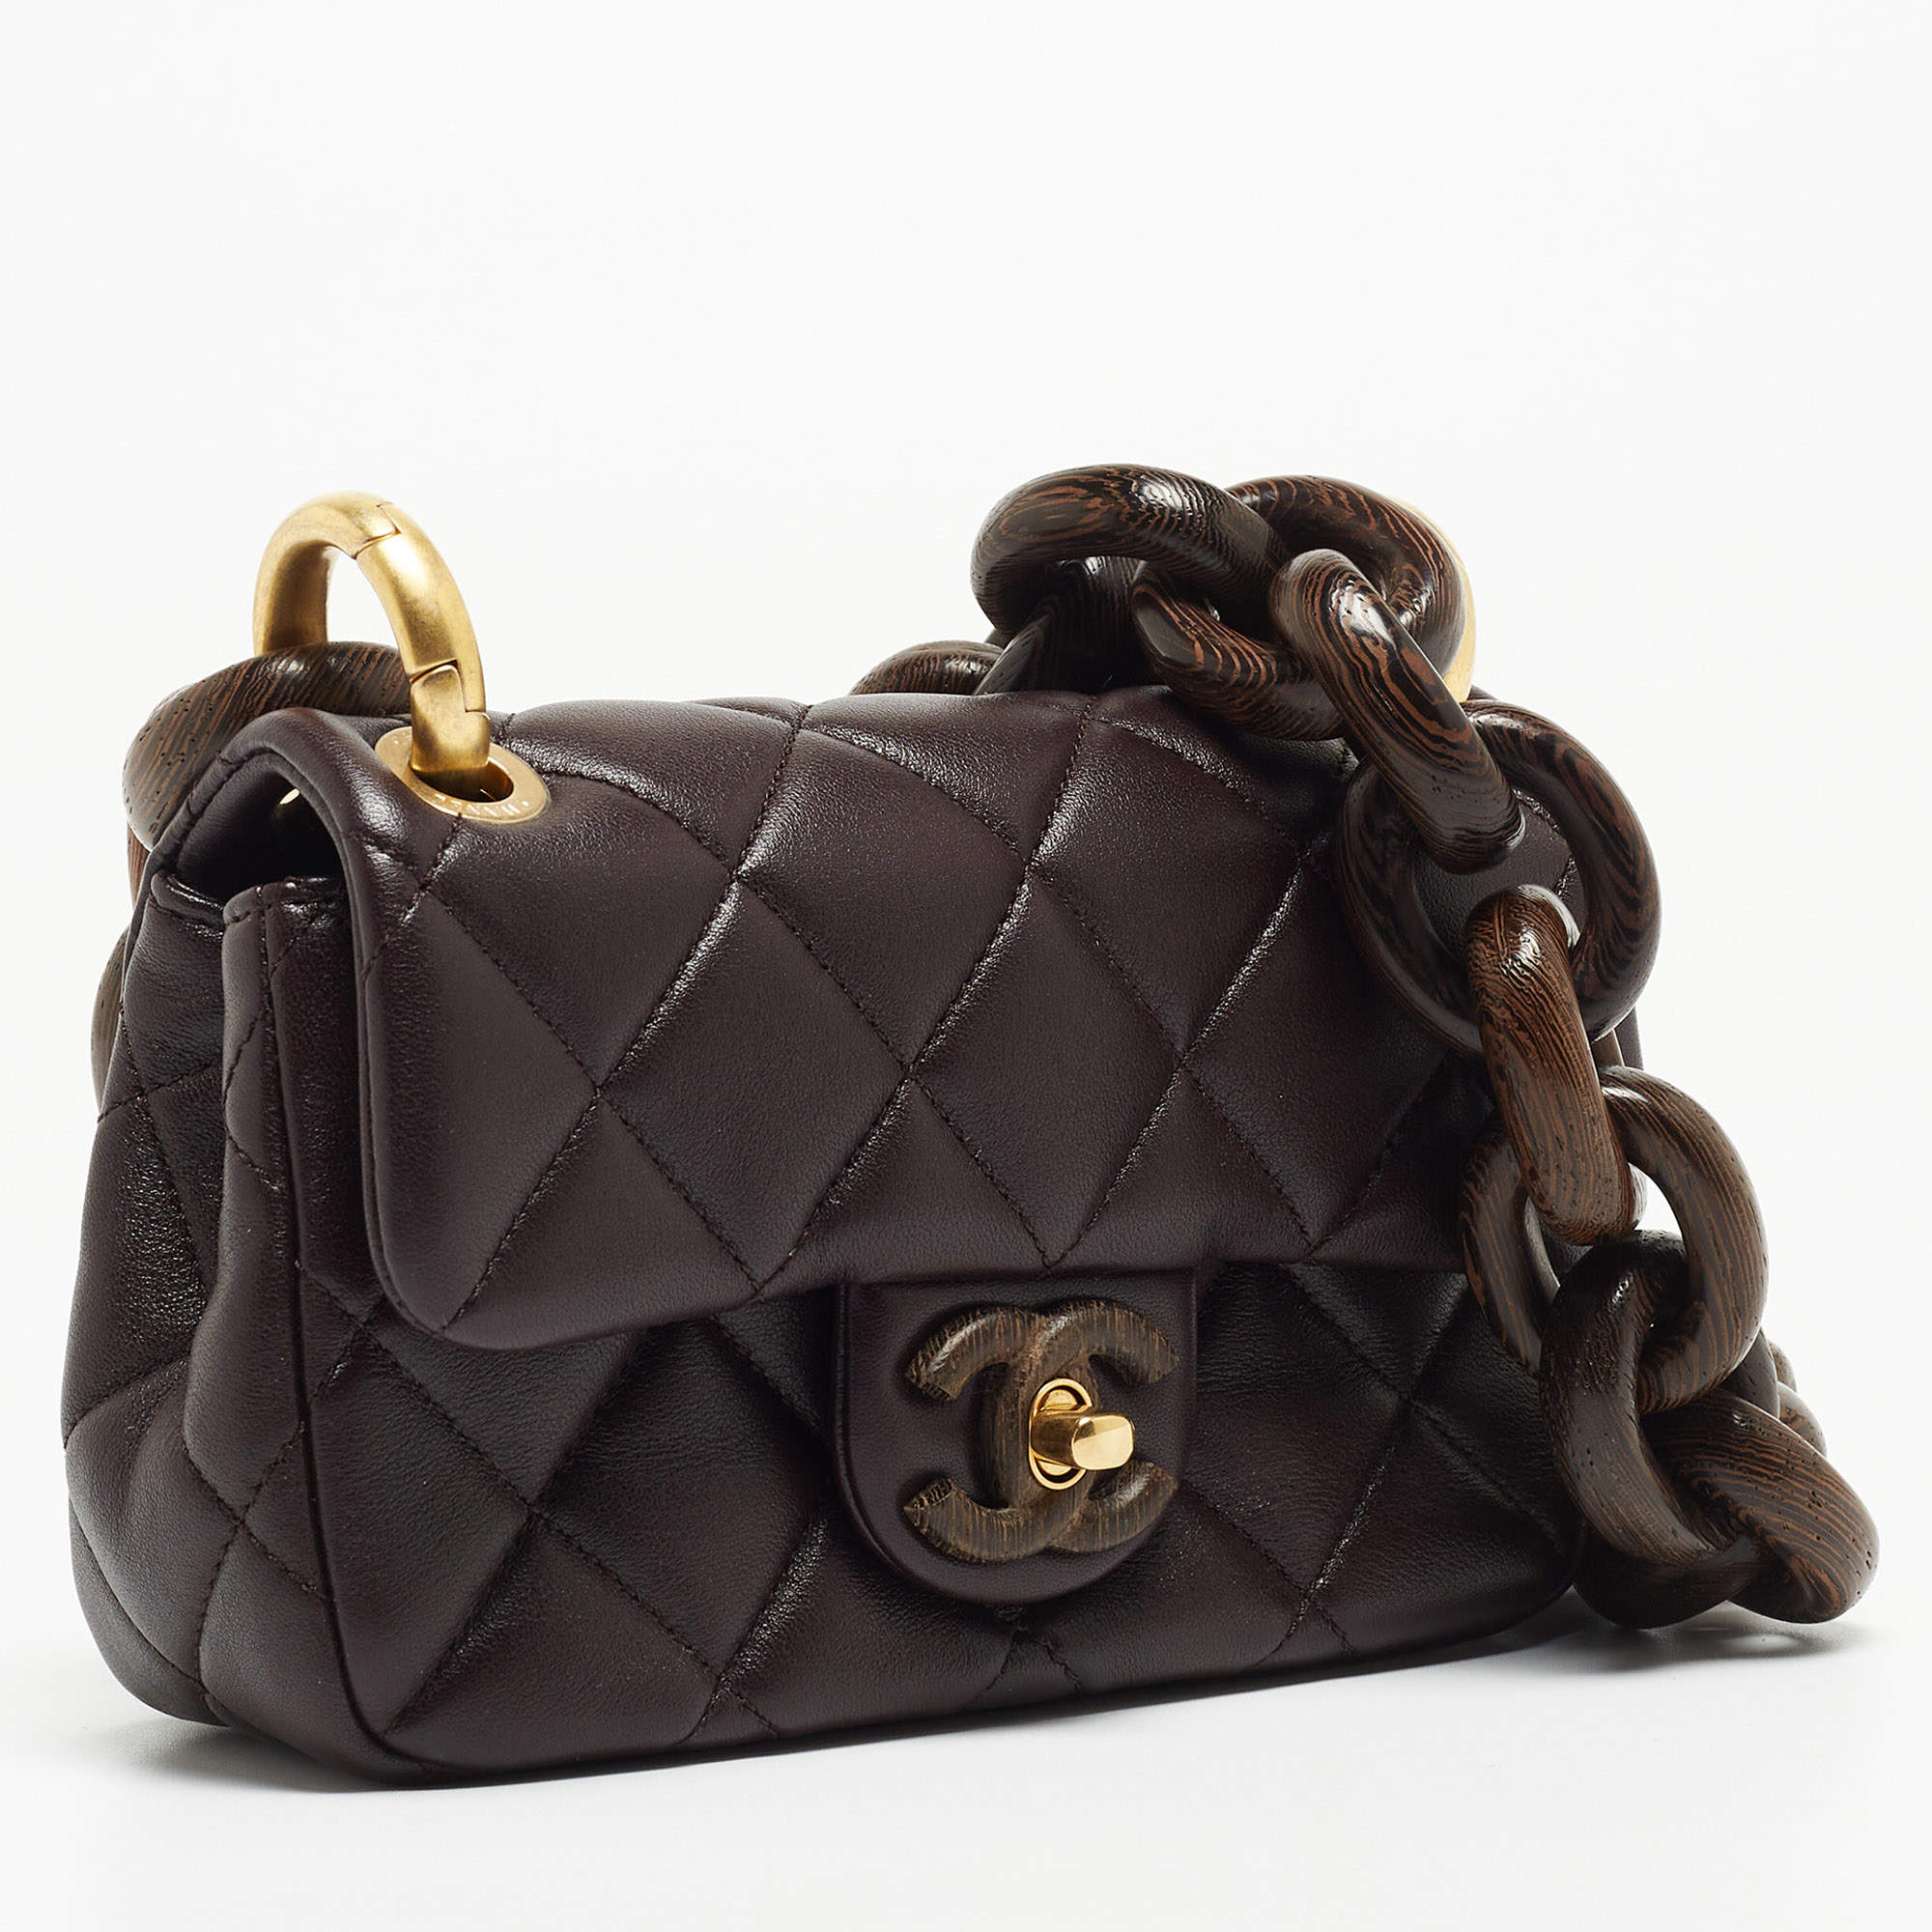 Chanel Burgundy Quilted Leather and Wood Mini Flap Bag Chanel